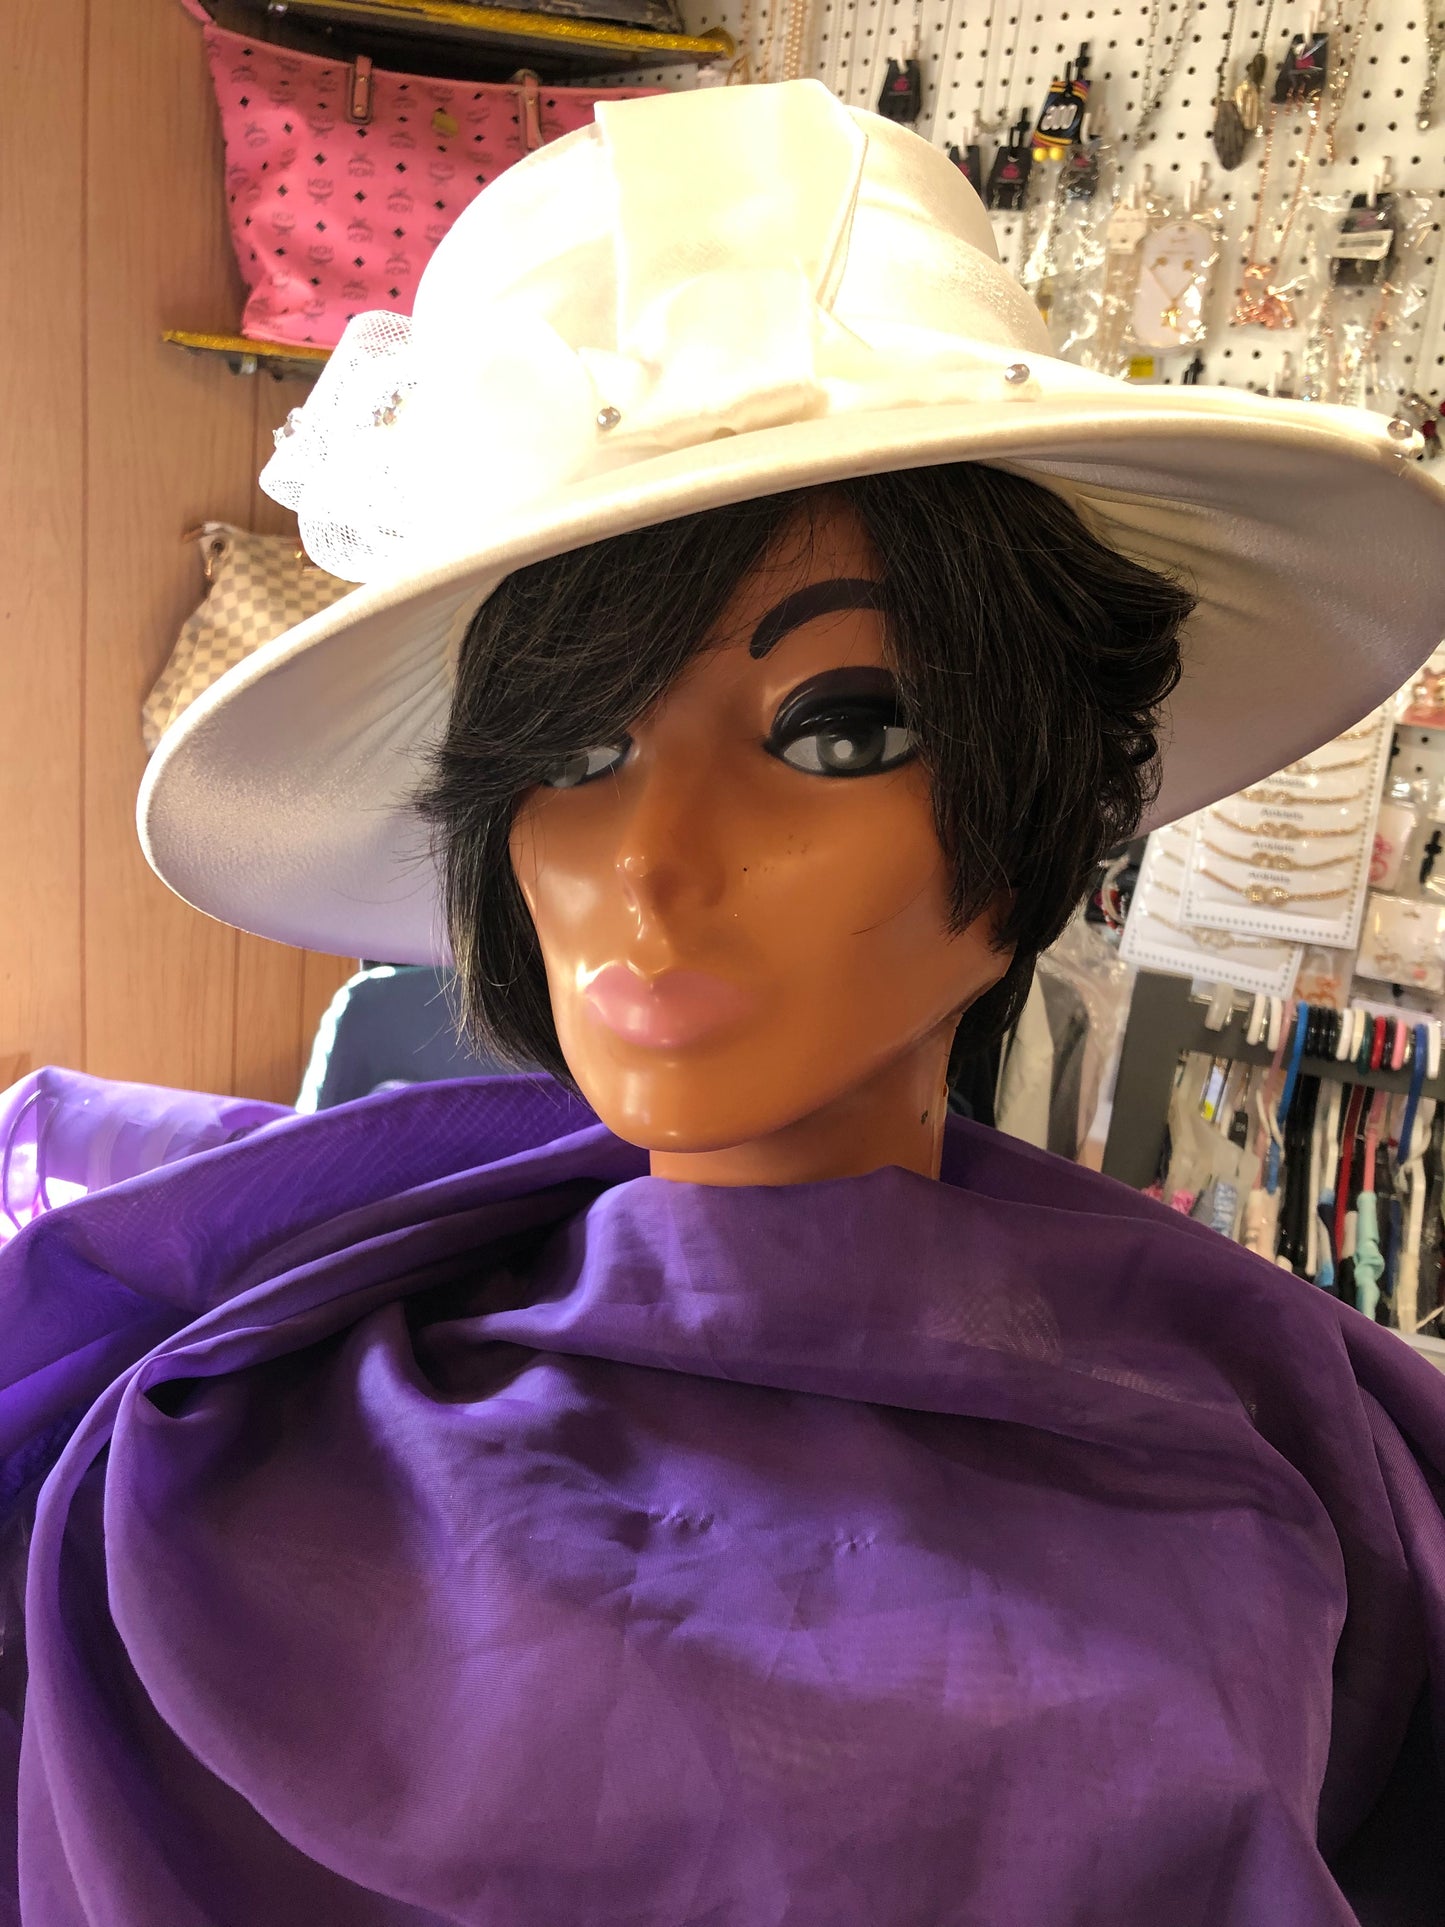 Woman Wide Brim White Hat "Just In Time For Mothers Day"